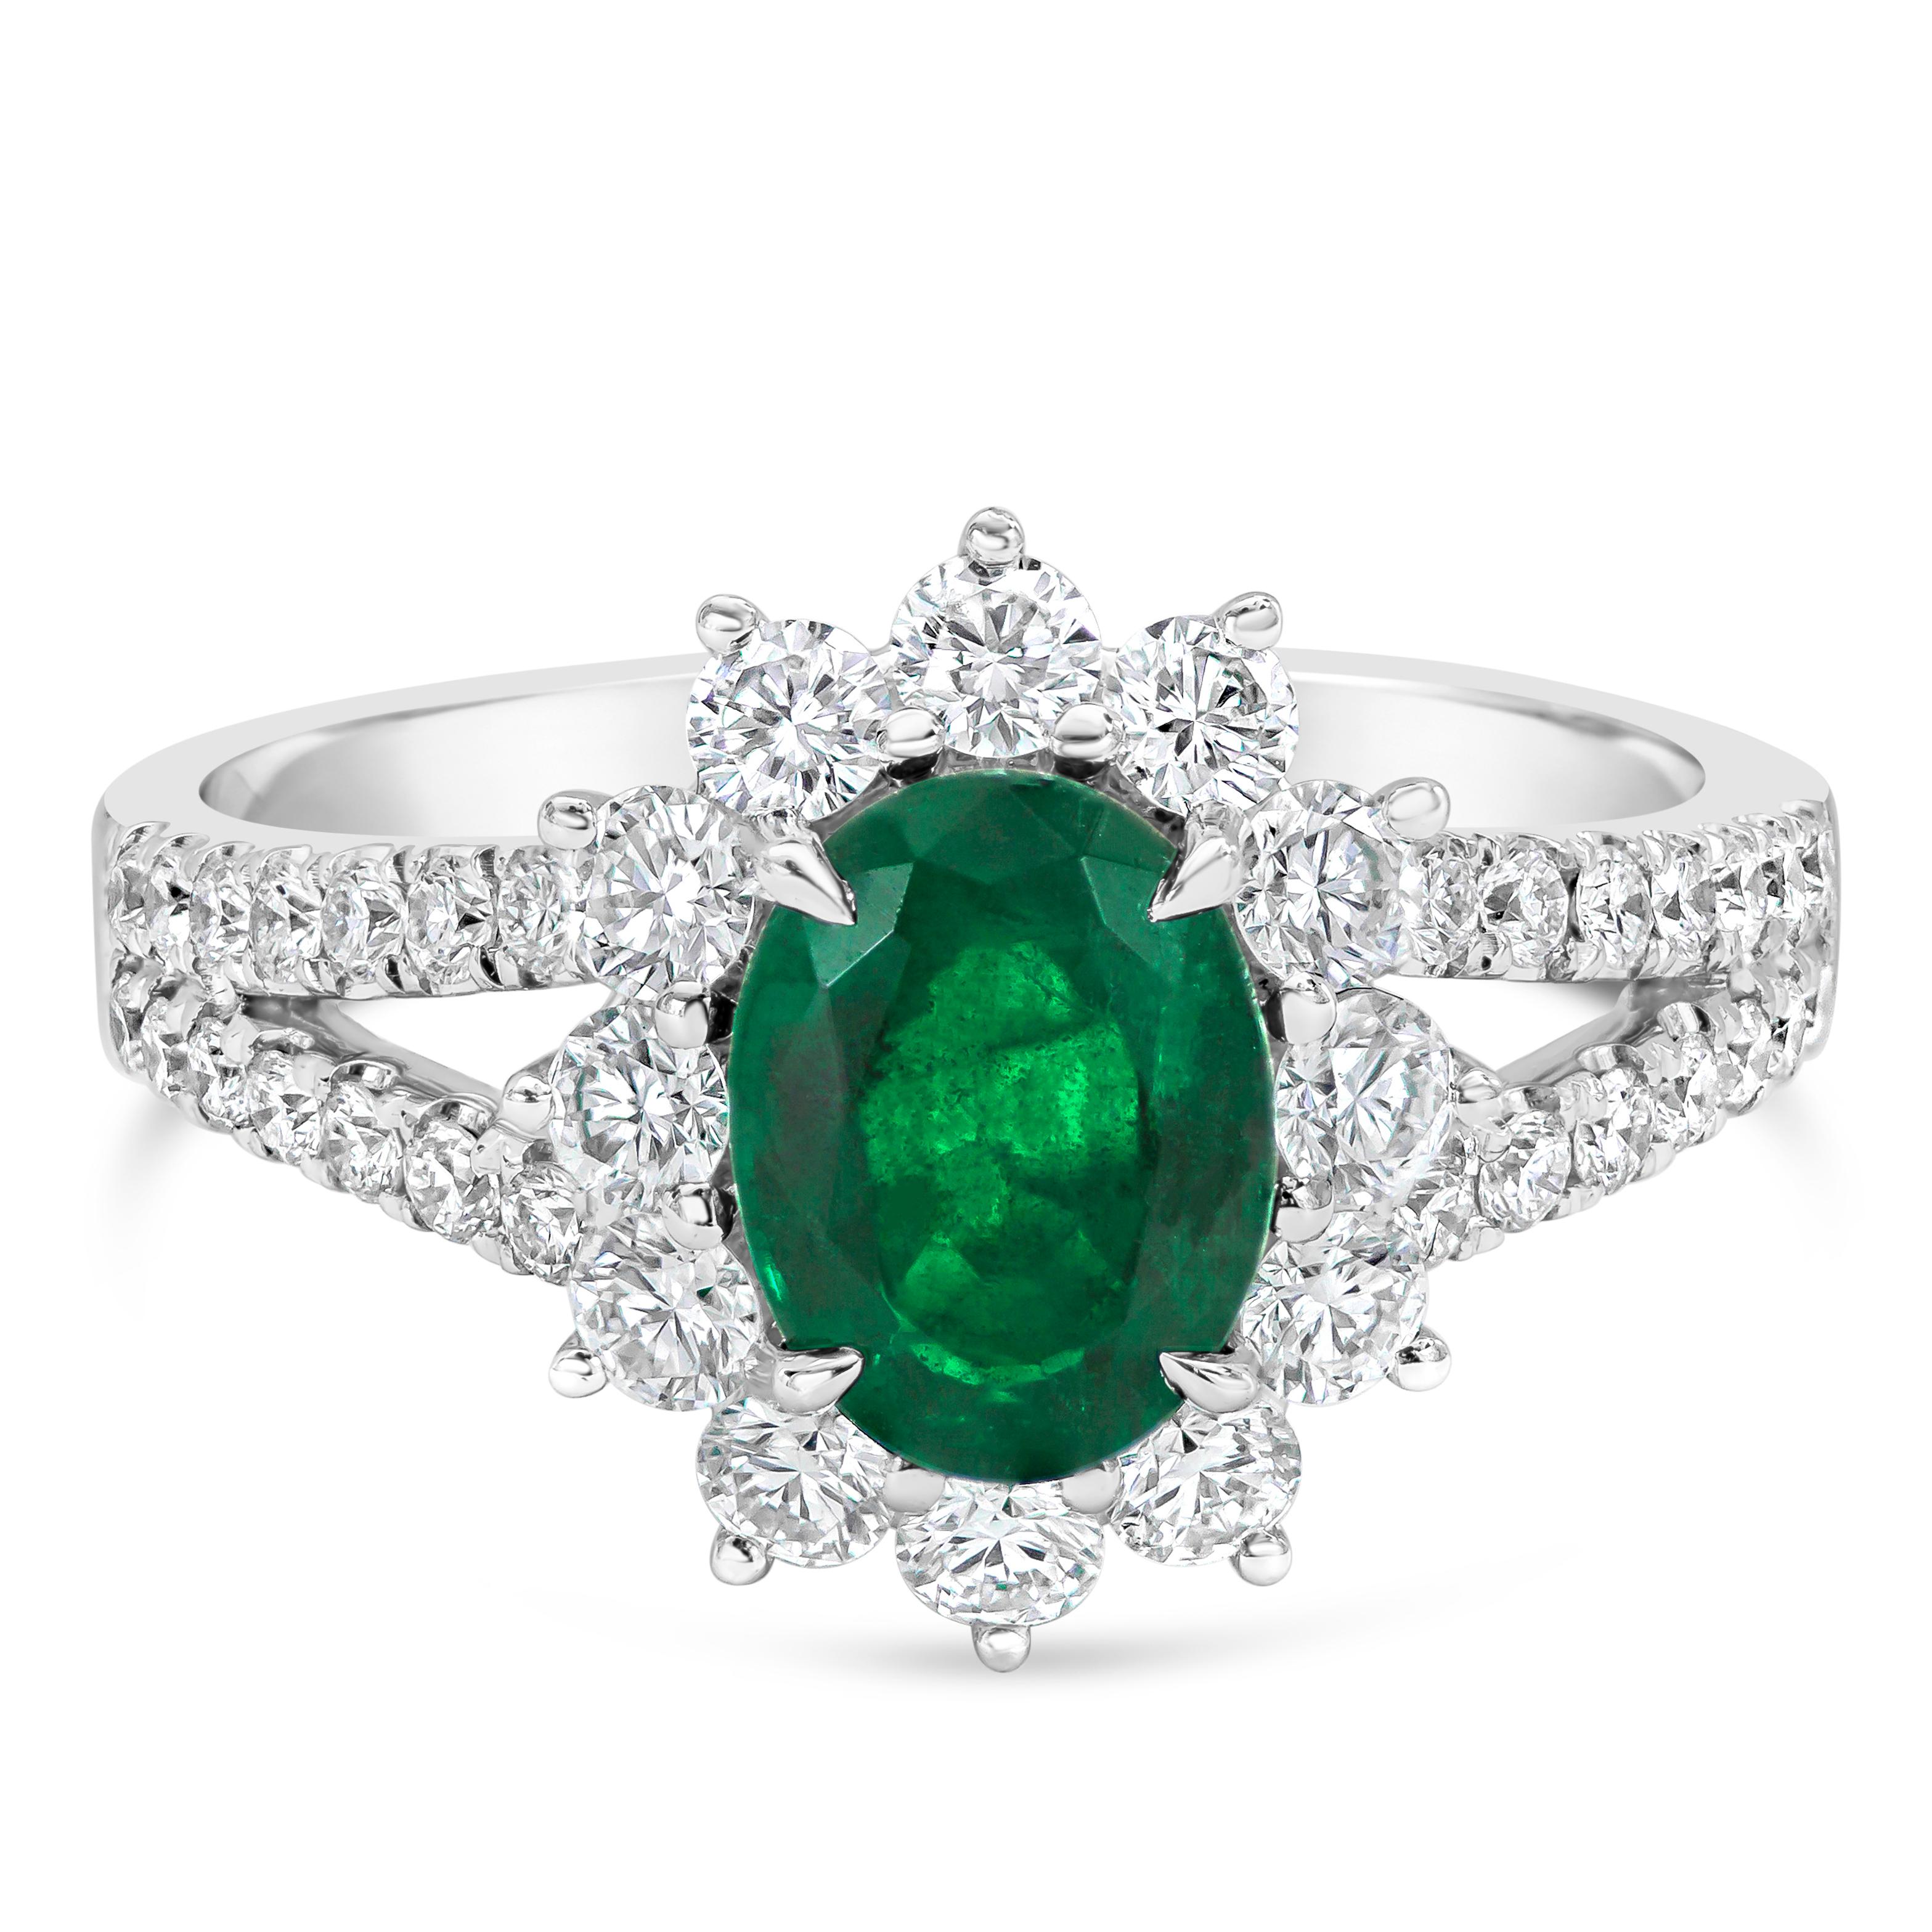 This ring features a center stone that embodies calmness and everlasting love. The vibrant green emerald weighs 1.17 carats and is surrounded by a single row of dazzling round diamonds. The halo is elegantly sits in an 18 karat white gold split